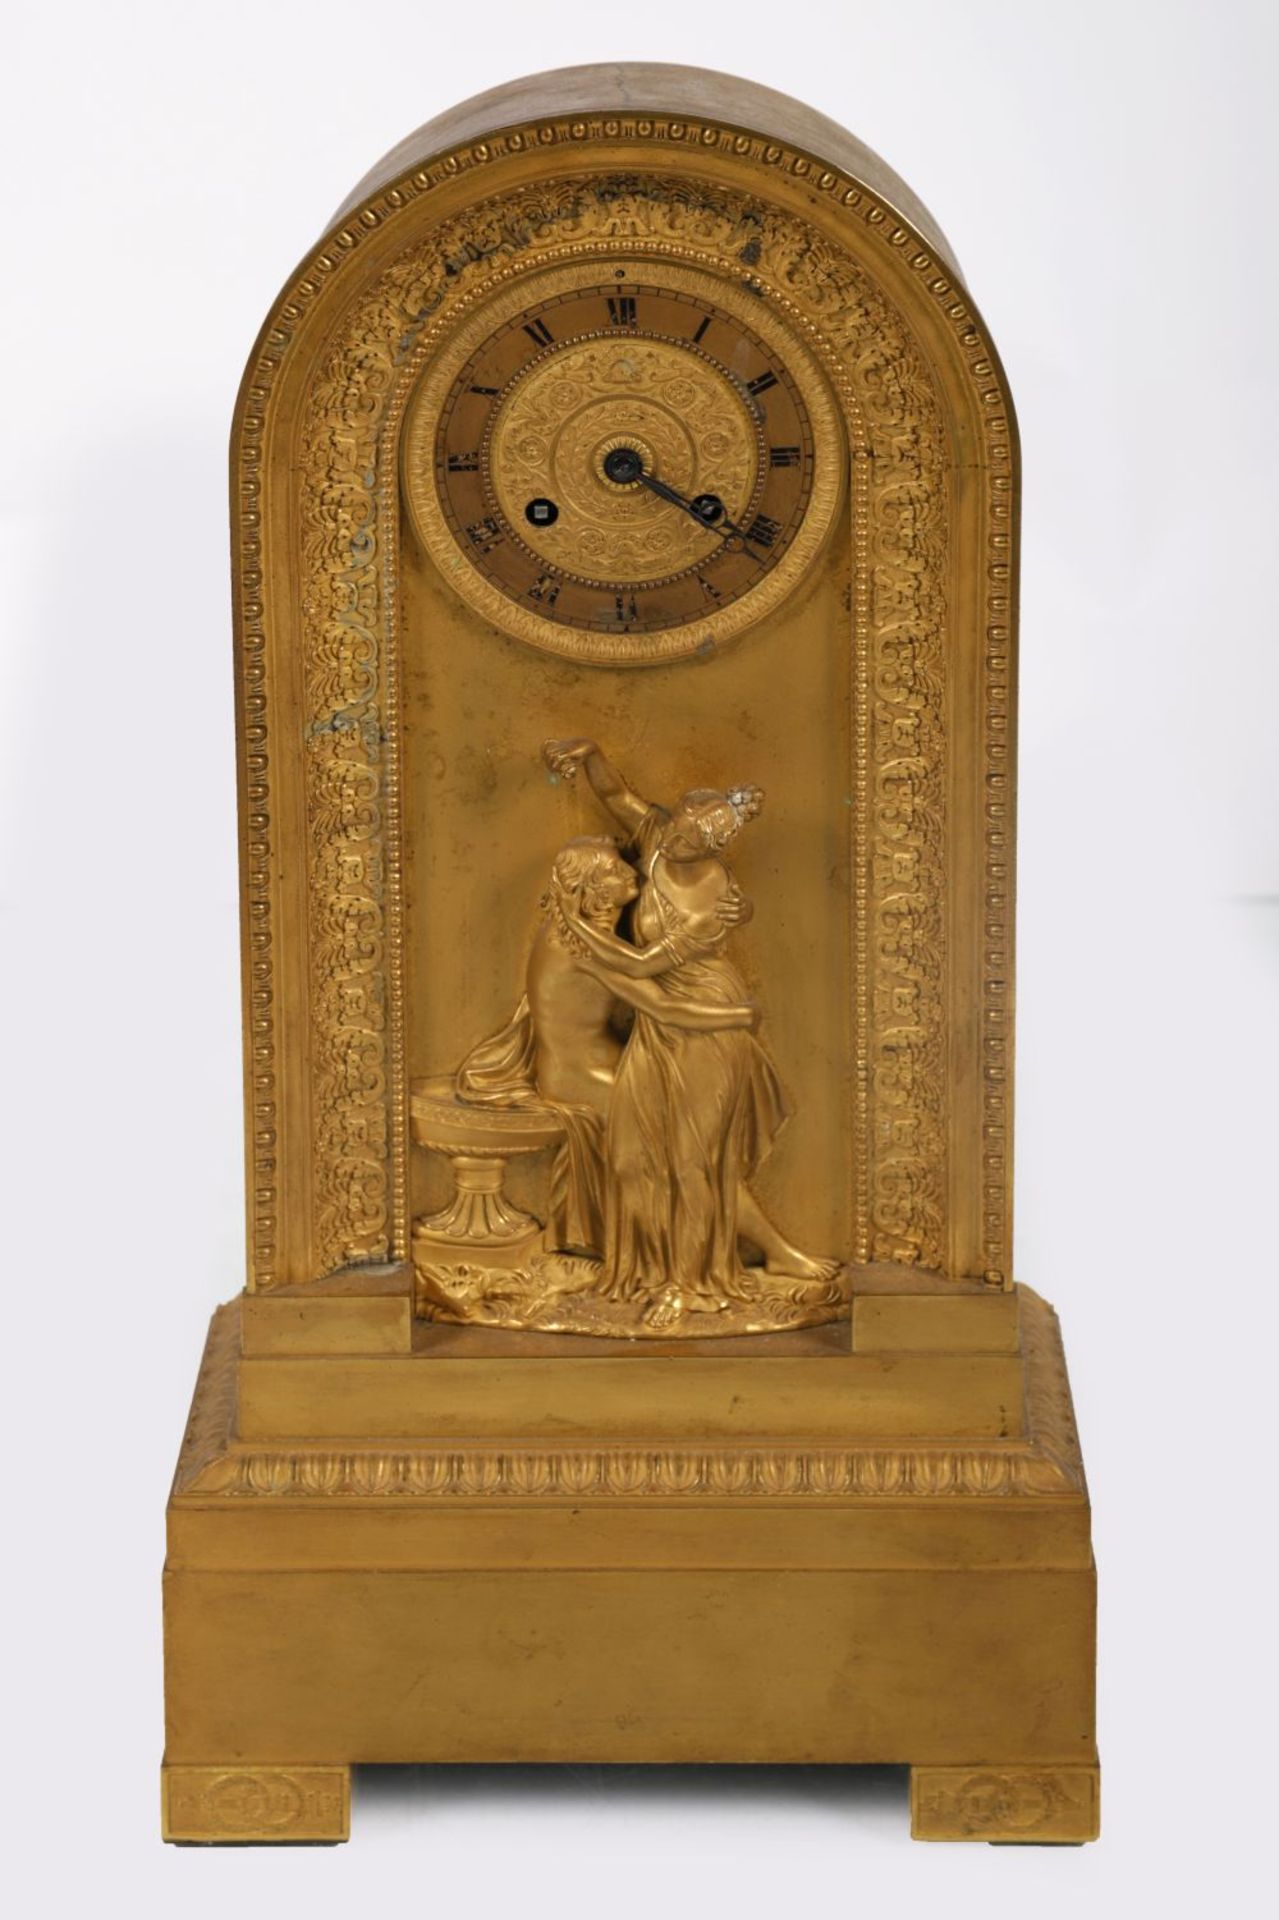 19TH-CENTURY FRENCH EMPIRE MANTLE CLOCK